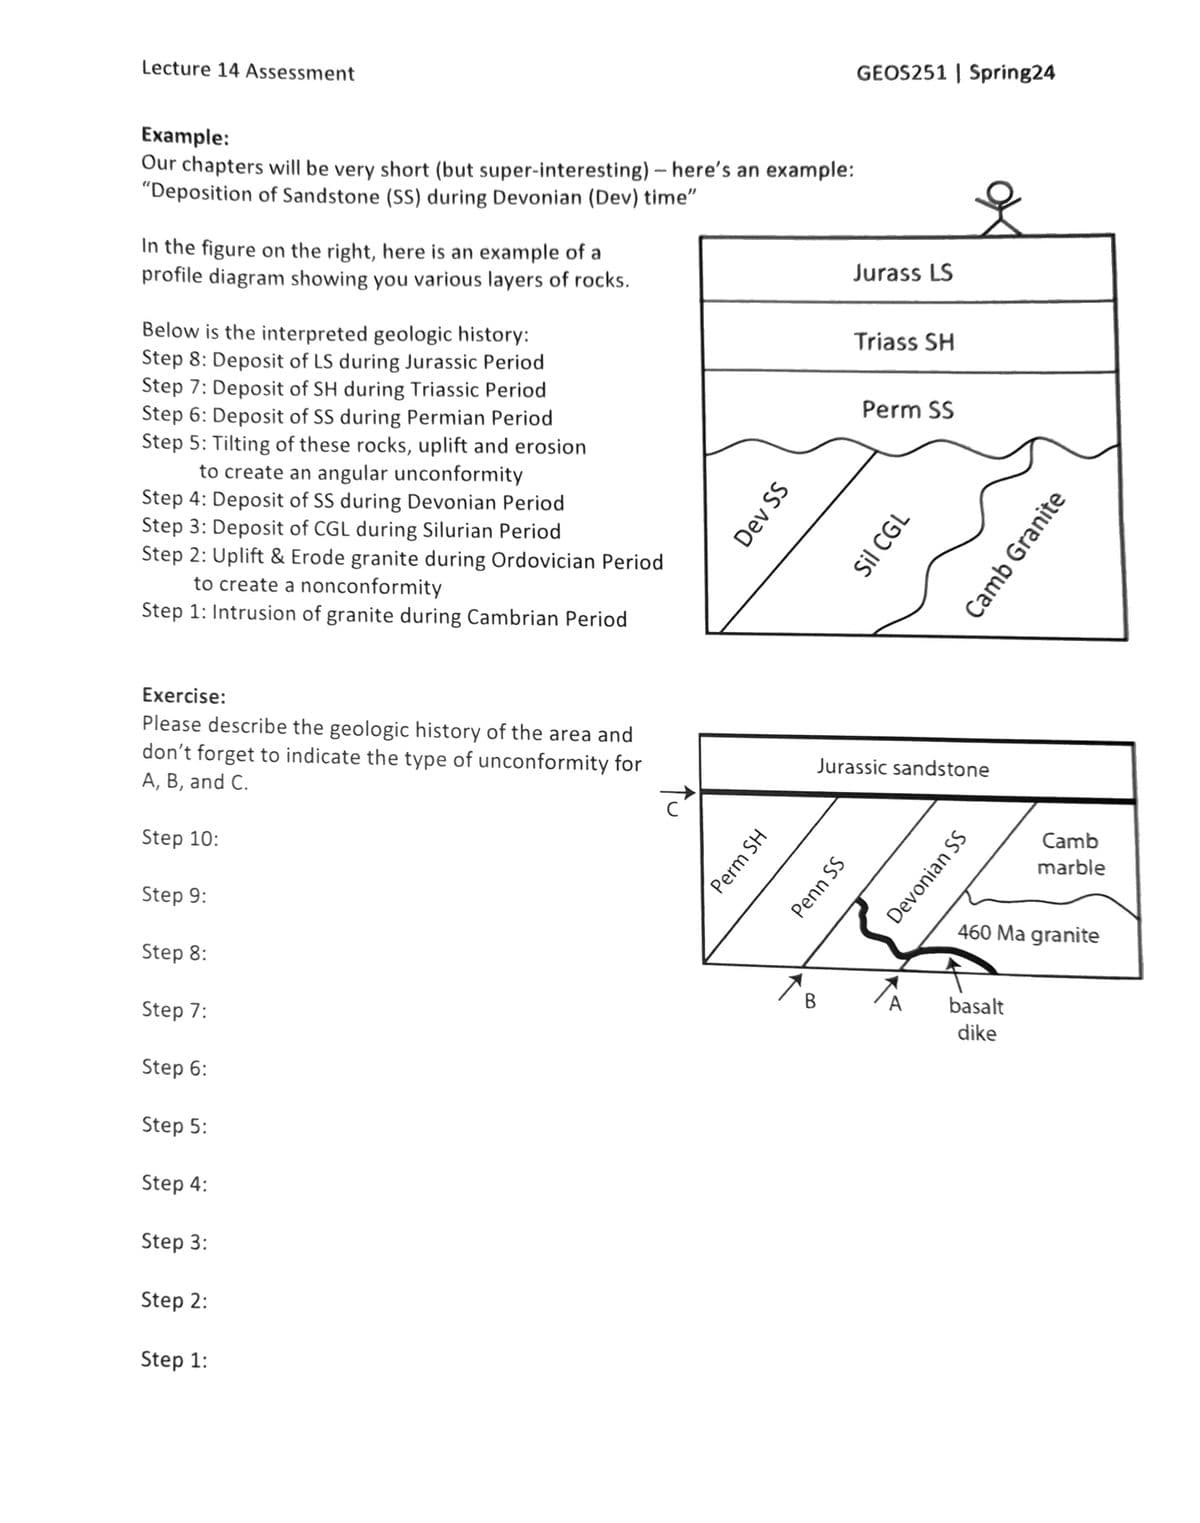 Lecture 14 Assessment
Example:
Our chapters will be very short (but super-interesting) - here's an example:
"Deposition of Sandstone (SS) during Devonian (Dev) time"
In the figure on the right, here is an example of a
profile diagram showing you various layers of rocks.
Below is the interpreted geologic history:
Step 8: Deposit of LS during Jurassic Period
Step 7: Deposit of SH during Triassic Period.
Step 6: Deposit of SS during Permian Period
Step 5: Tilting of these rocks, uplift and erosion
to create an angular unconformity
Step 4: Deposit of SS during Devonian Period
Step 3: Deposit of CGL during Silurian Period
Step 2: Uplift & Erode granite during Ordovician Period
to create a nonconformity
Step 1: Intrusion of granite during Cambrian Period
Exercise:
Please describe the geologic history of the area and
don't forget to indicate the type of unconformity for
A, B, and C.
Step 10:
Step 9:
Step 8:
Step 7:
Step 6:
Step 5:
Step 4:
Step 3:
Step 2:
Step 1:
tu
Perm SH
Dev SS
B
GEOS251 | Spring24
Penn SS
Jurass LS
Triass SH
Perm SS
Jurassic sandstone
Sil CGL
A
Devonian SS
Camb Granite
basalt
dike
Camb
marble
460 Ma granite